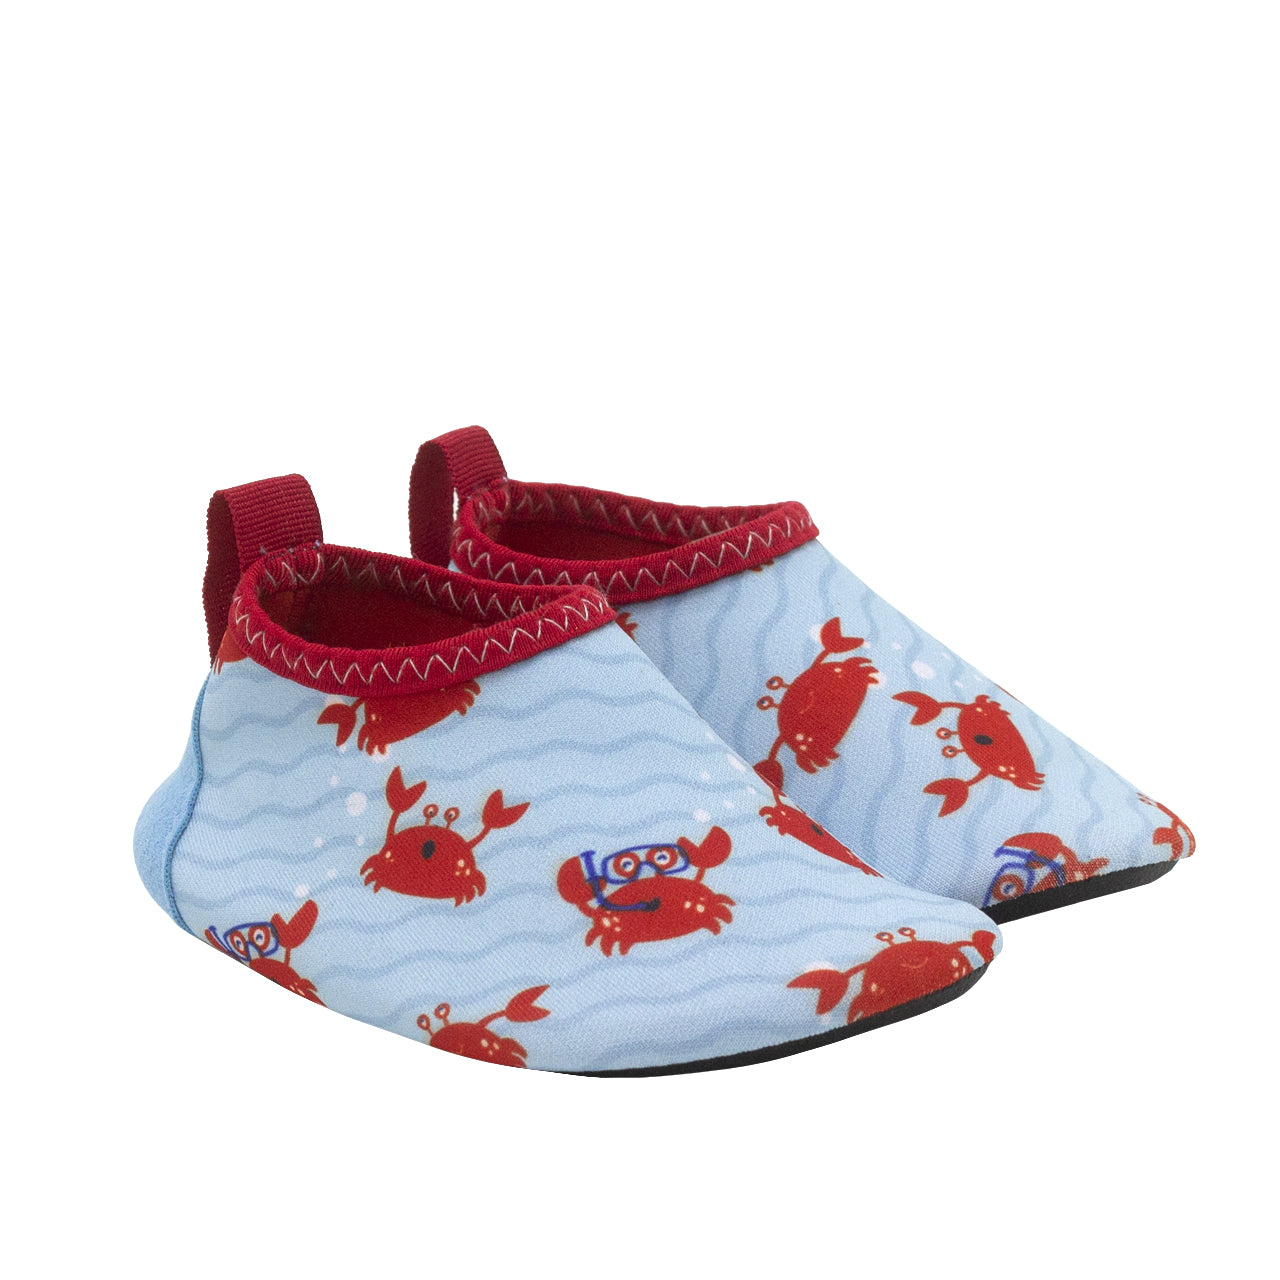 THE baby summer shoe that's made for any activity in and out of the water. We know going on summer outings with a little one in tow isn't always easy. That's why we've made these Robeez water shoes functional for prewalkers (flexibility gives the feel of walking barefoot with the added benefit of being a water shoe) and easy on parents (convenient heel loop that allows for easy on-and-off).